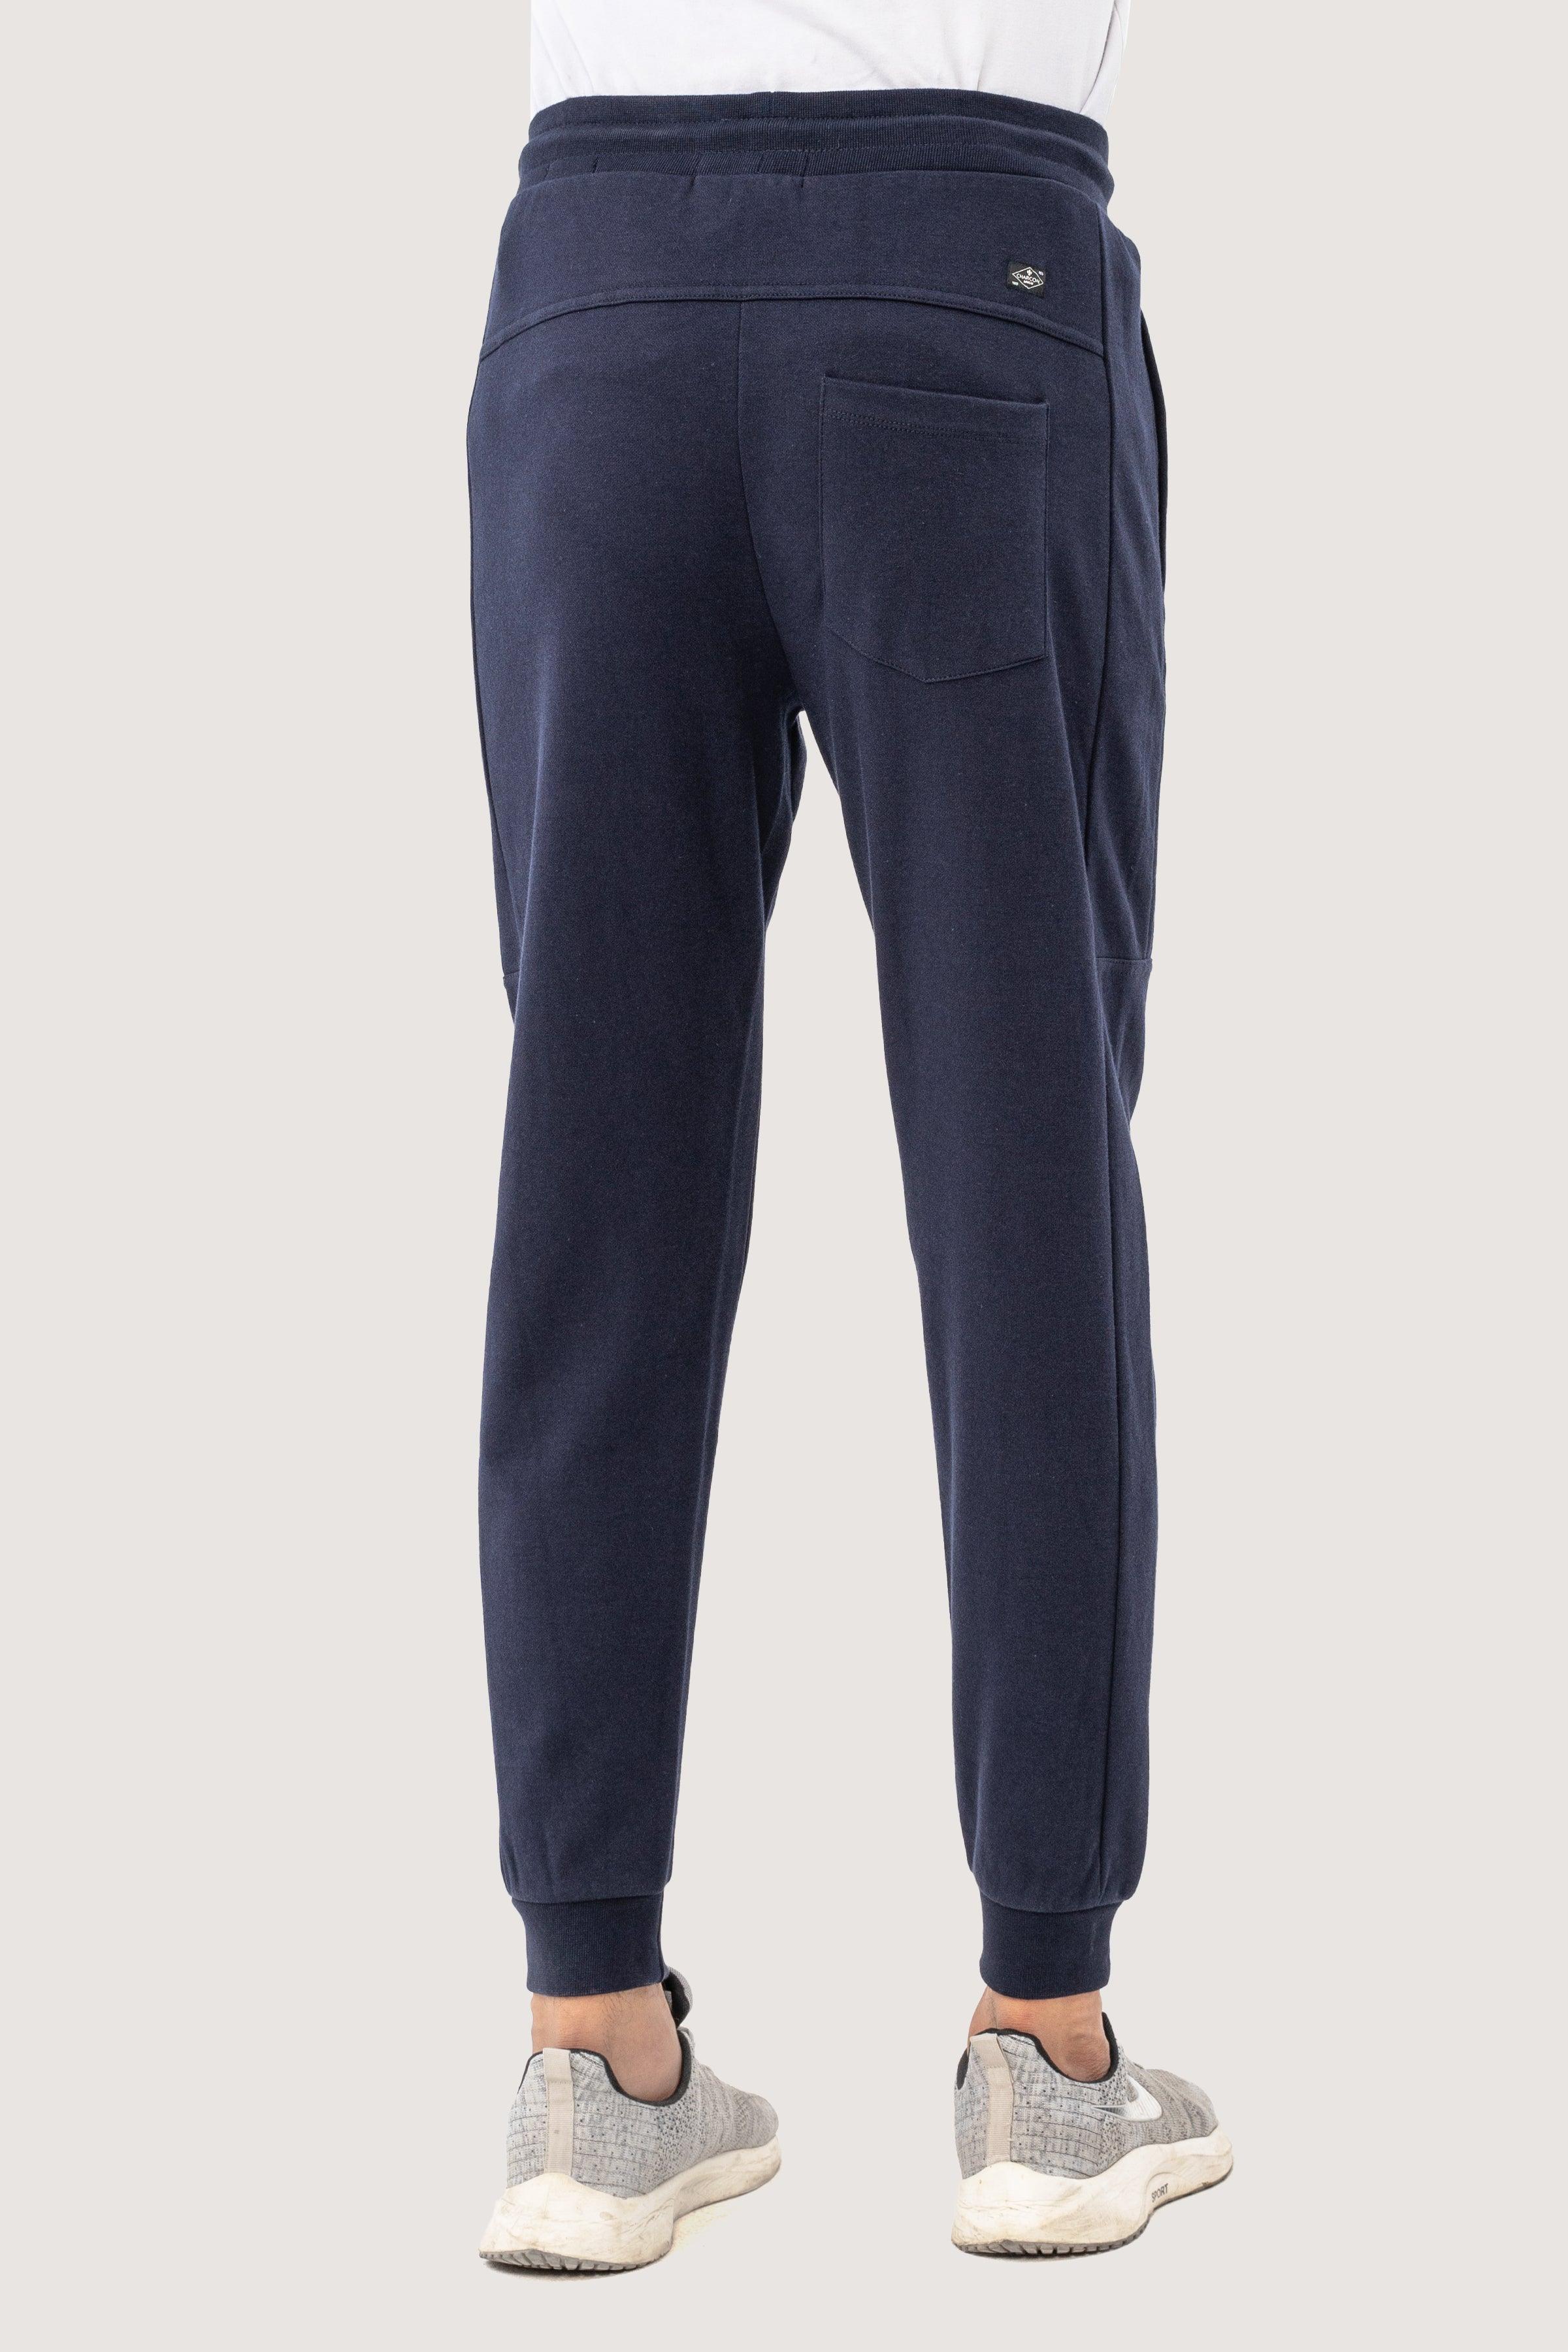 PIQUE INTERLOCK SLIMFIT TROUSER NAVY at Charcoal Clothing